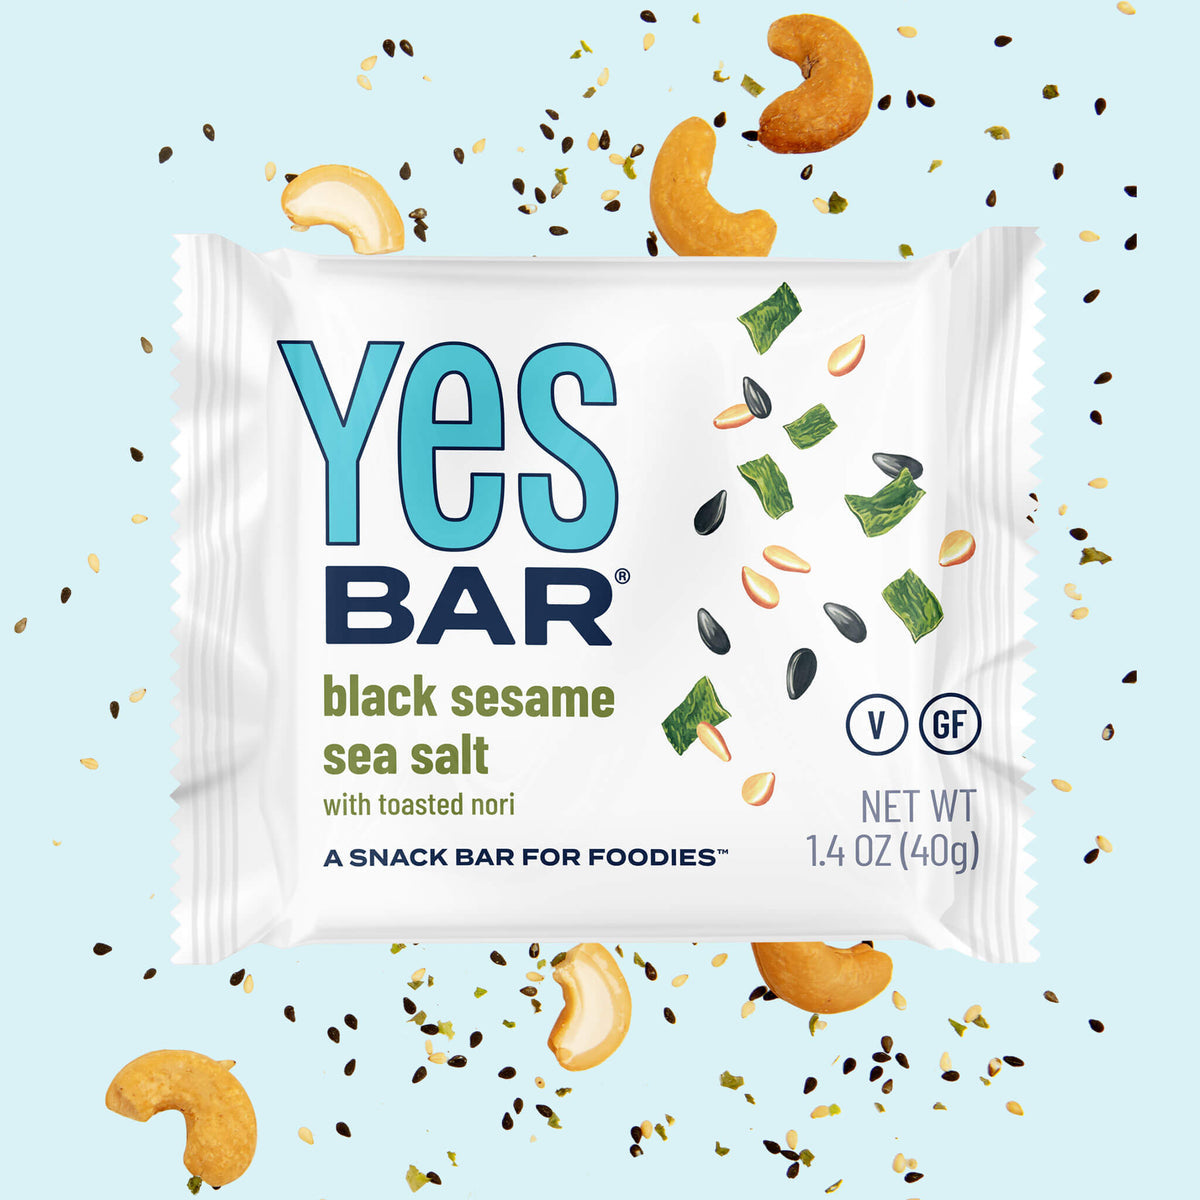 The Yes Bar